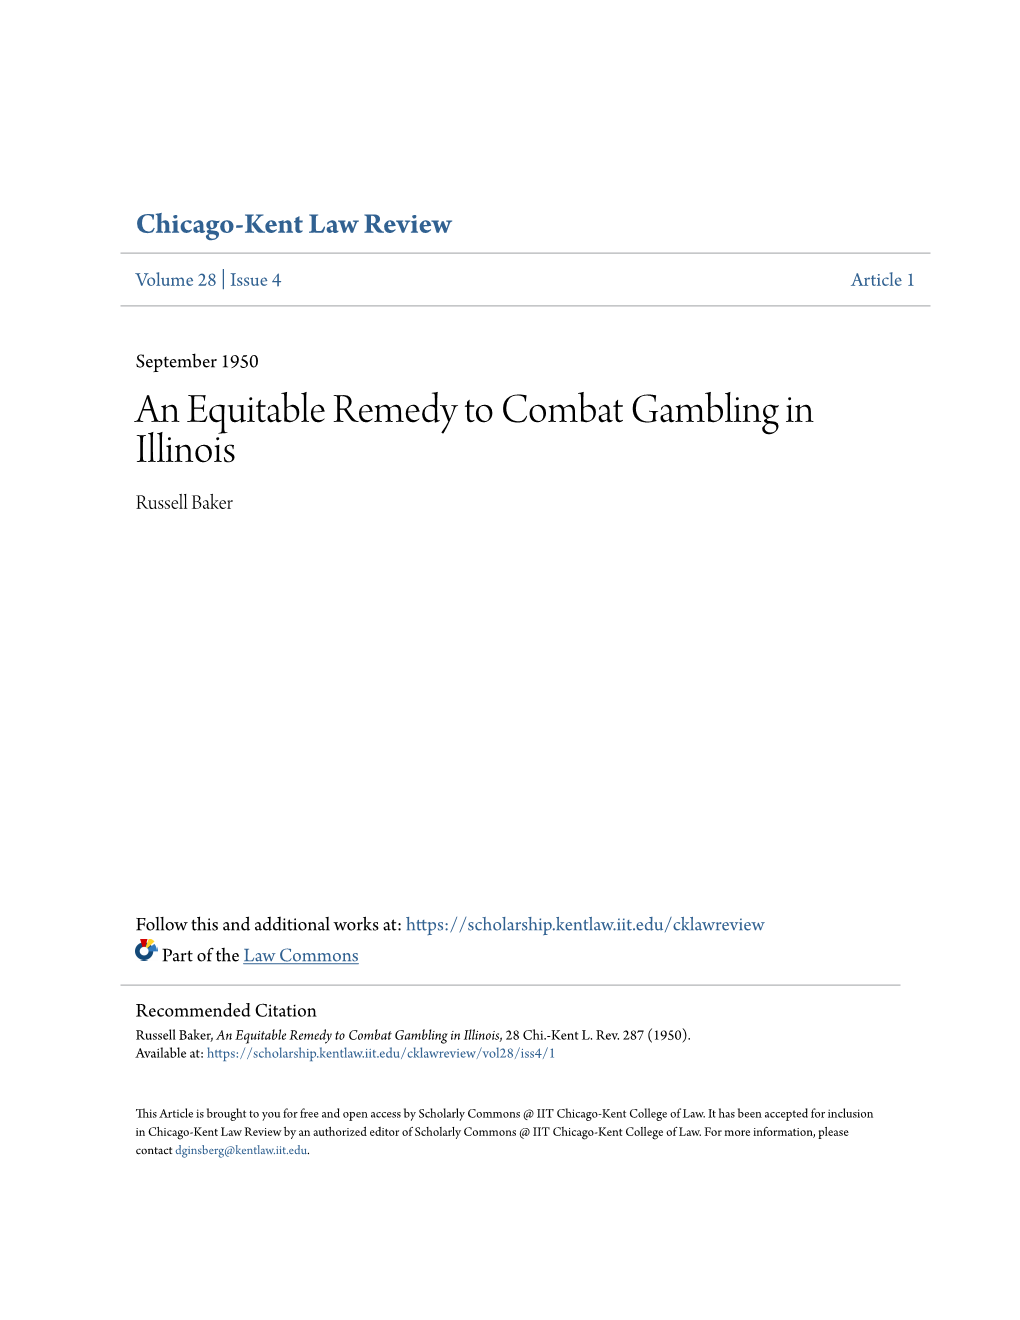 An Equitable Remedy to Combat Gambling in Illinois Russell Baker